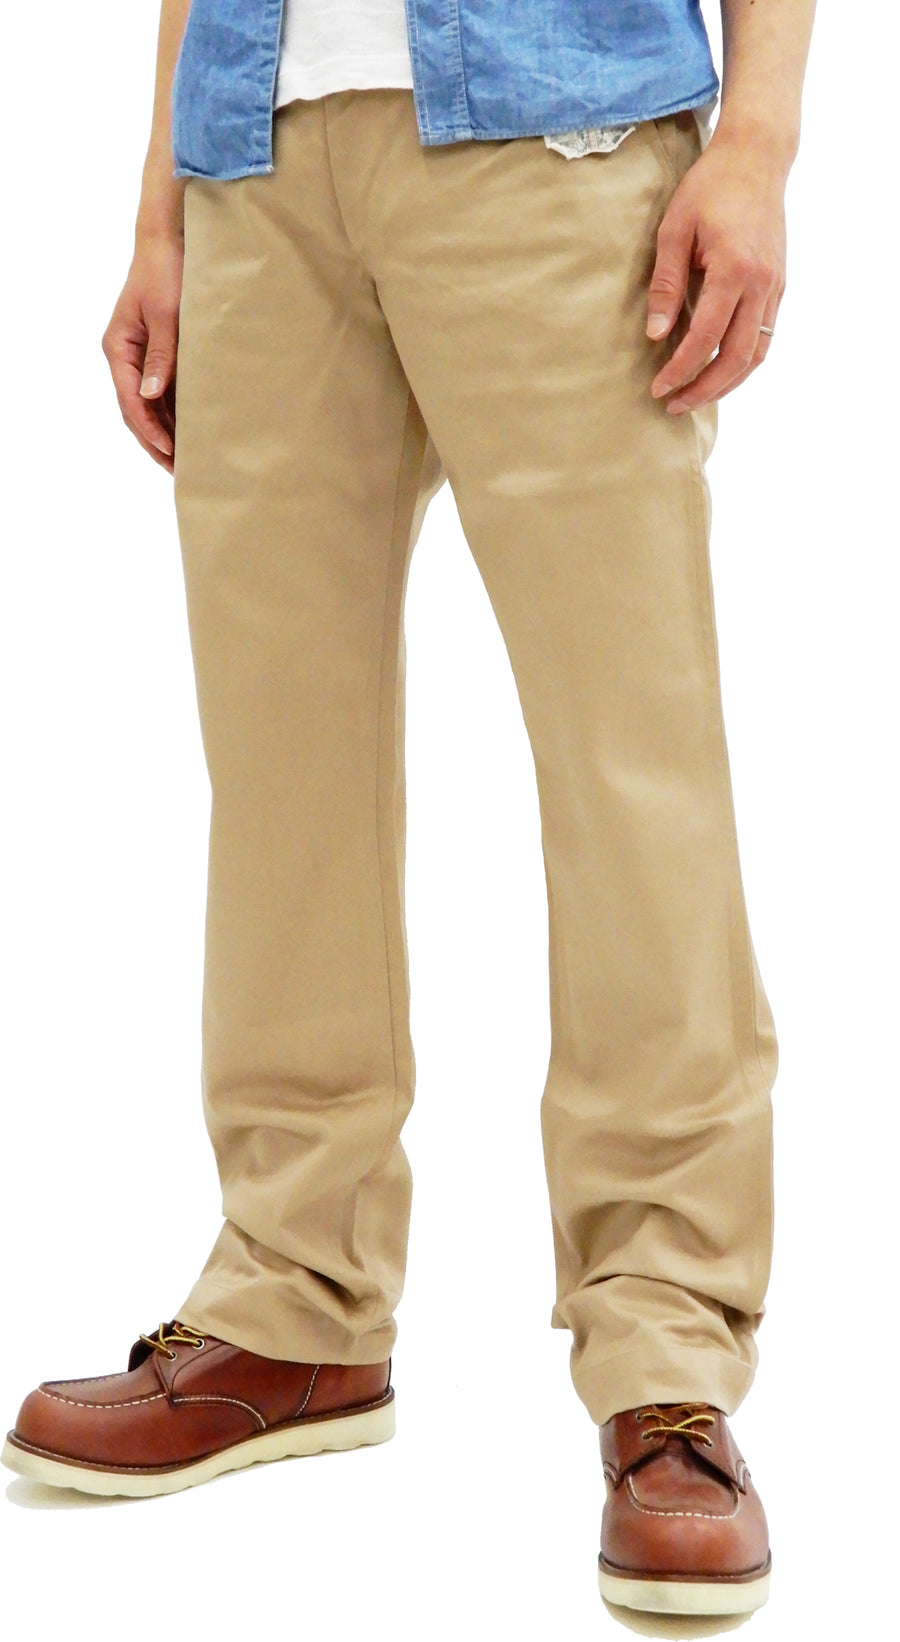 Buzz Rickson Trousers Men's Zip Fly Slimmer Fit US Army Chino 